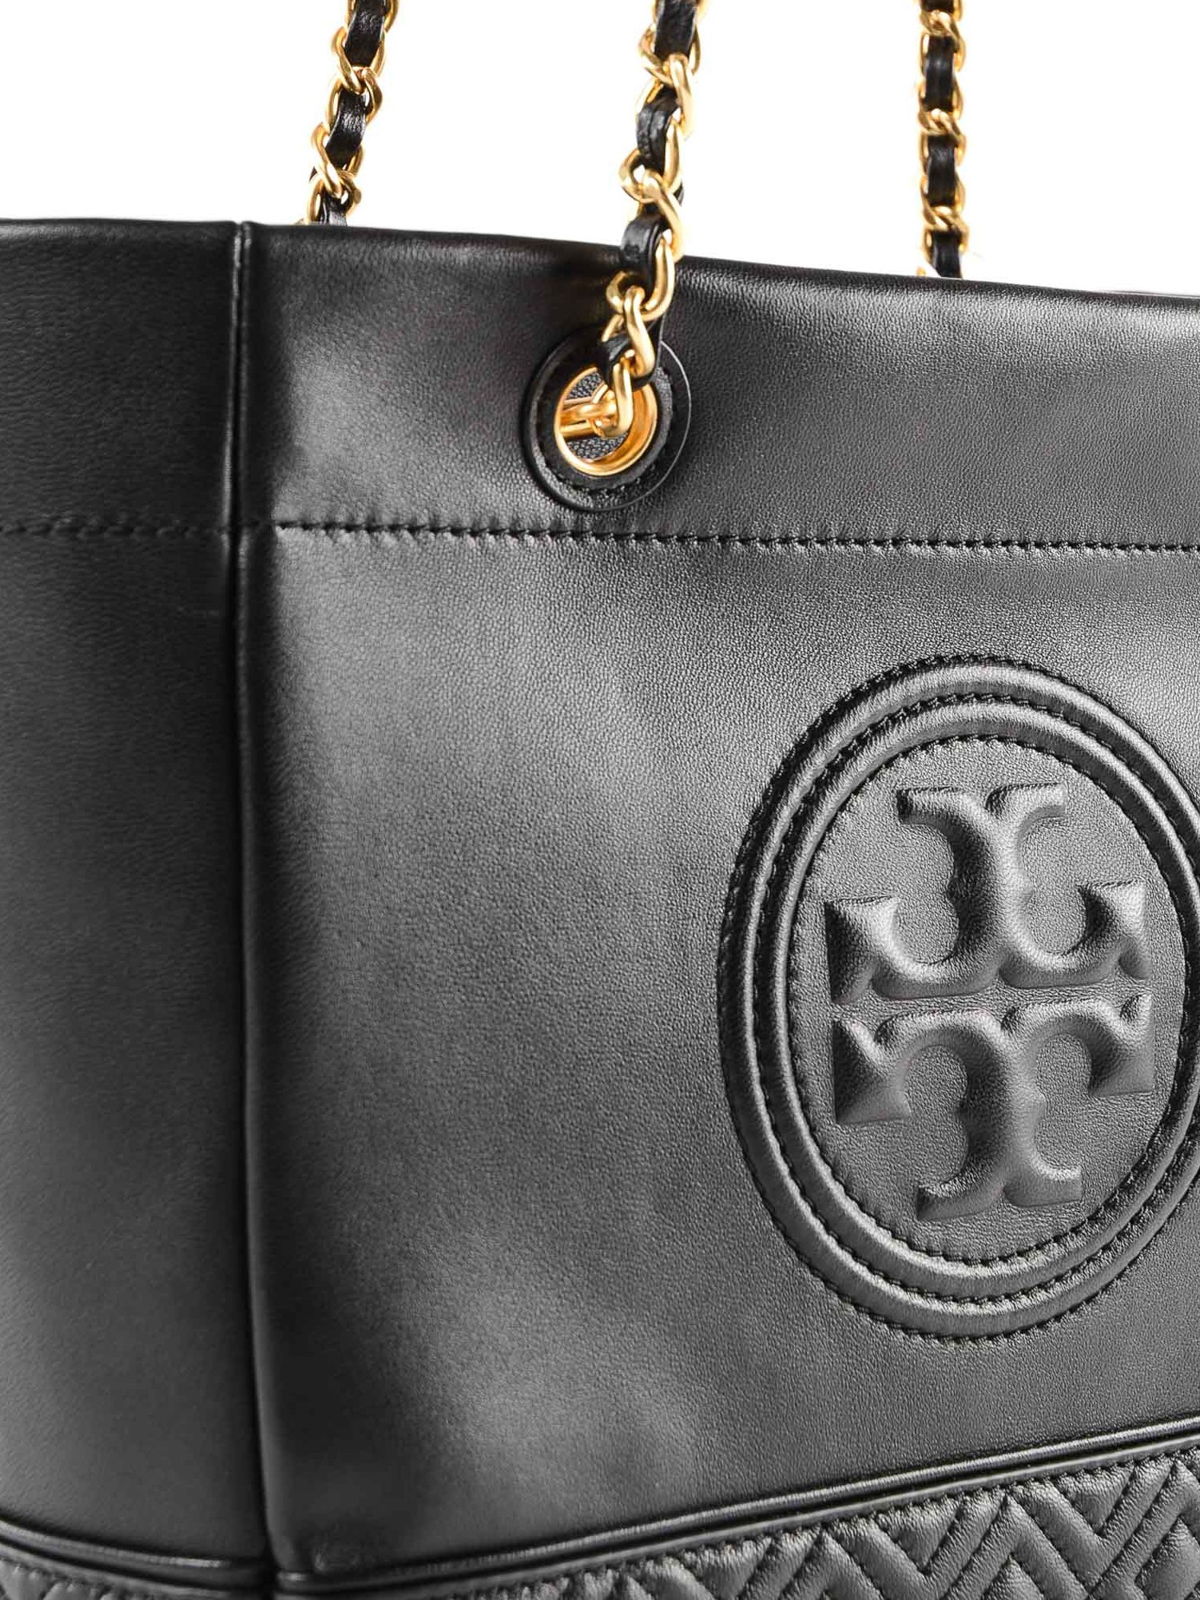 Totes bags Tory Burch - Fleming golden chain leather tote bag - 52983001